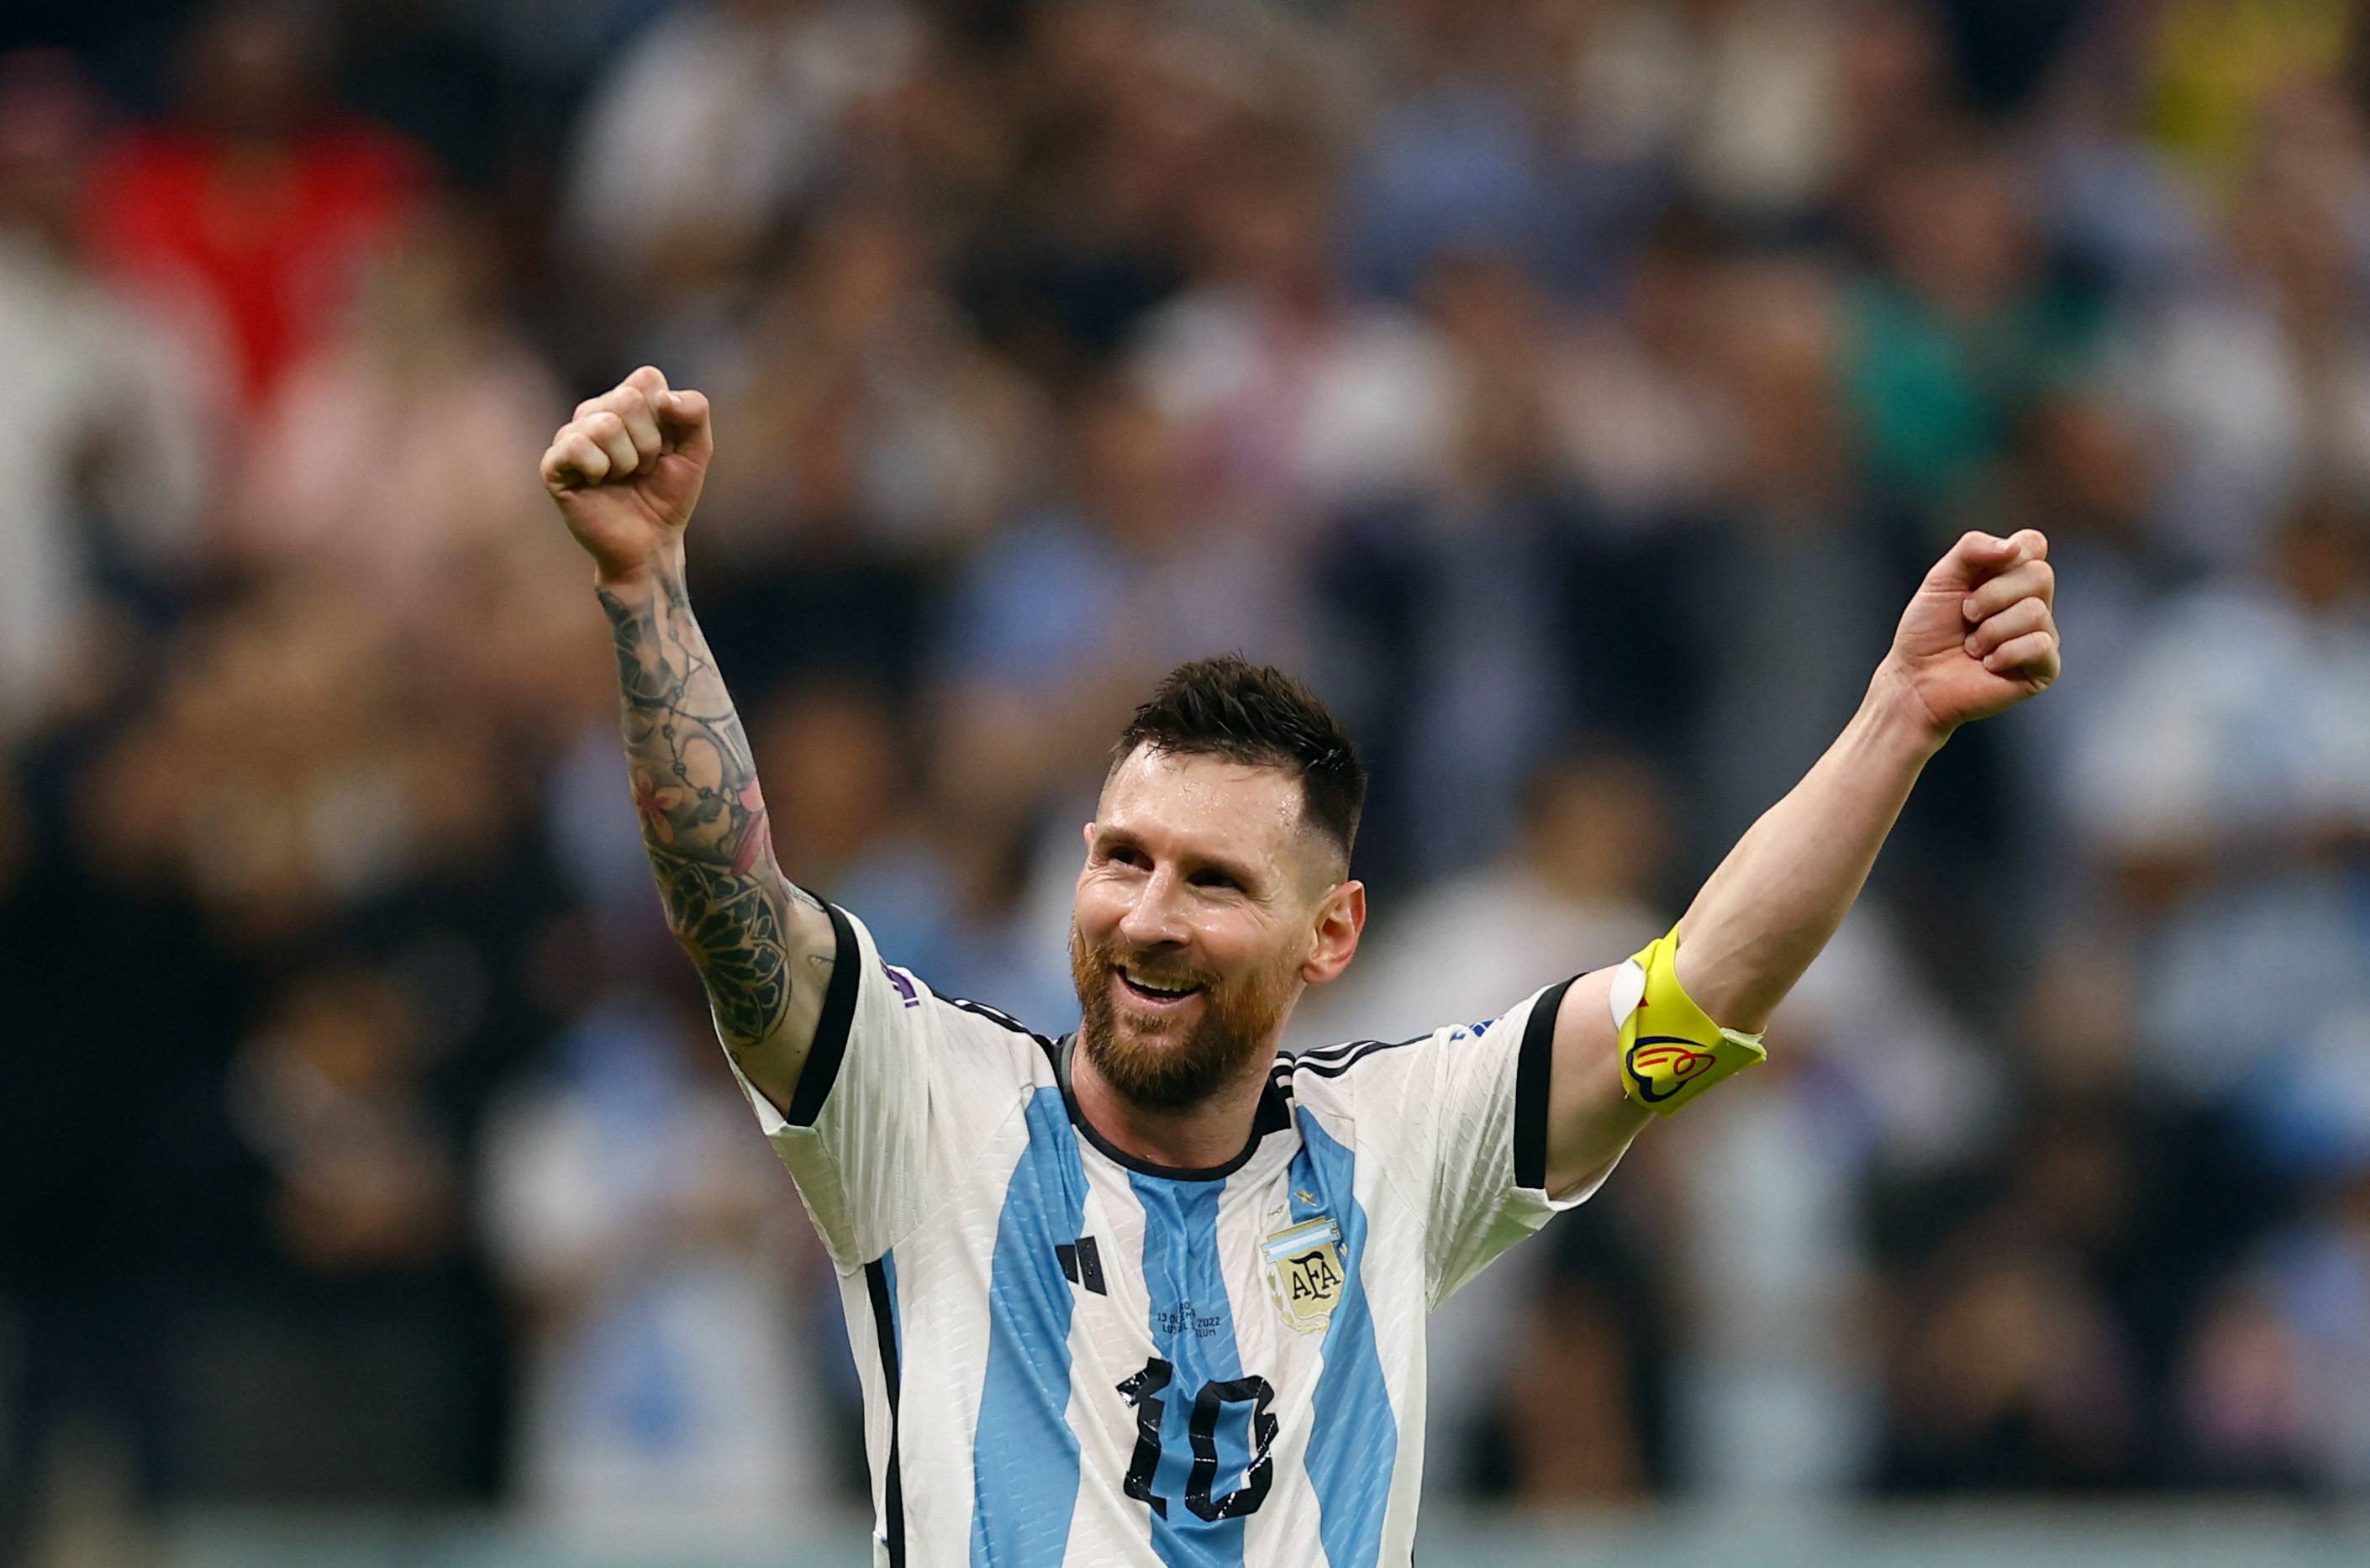 Video: NBA Star Challenging to Play Goalkeeper Against Lionel Messi